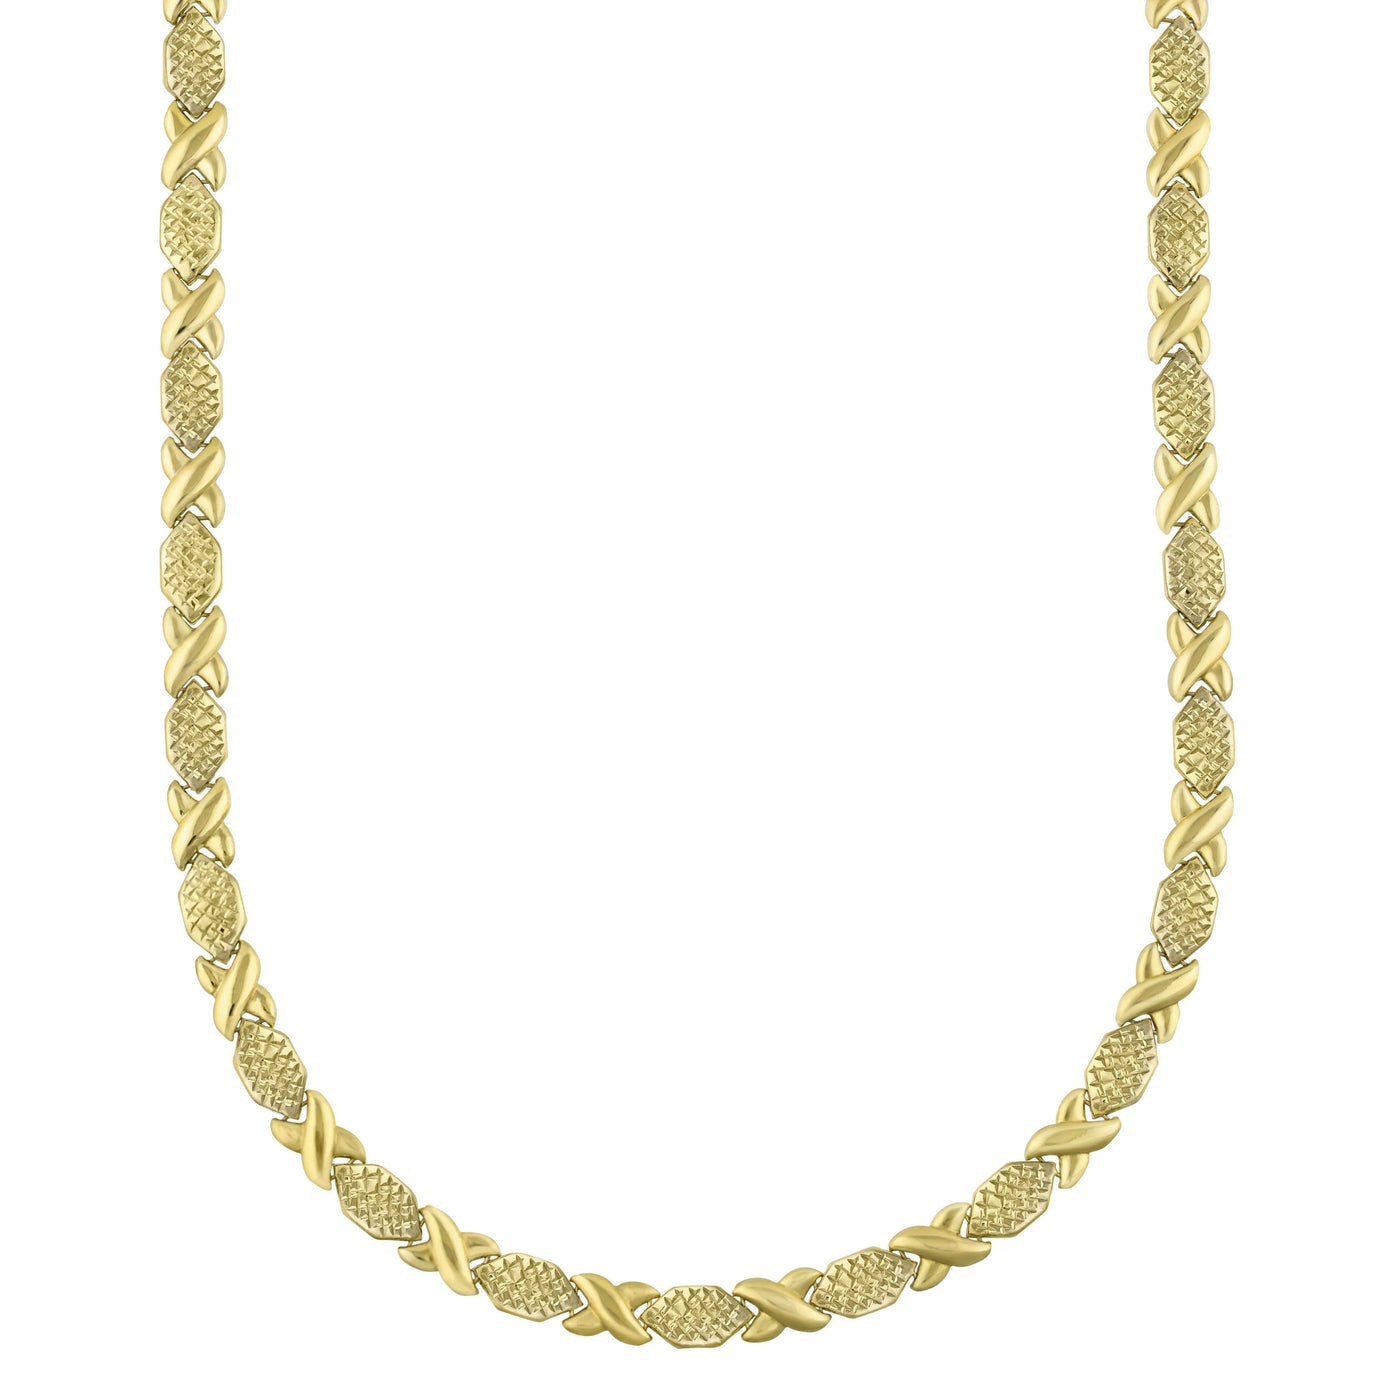 7mm Diamond Cut Hugs & Kisses Stampato Necklace 14K Yellow Gold